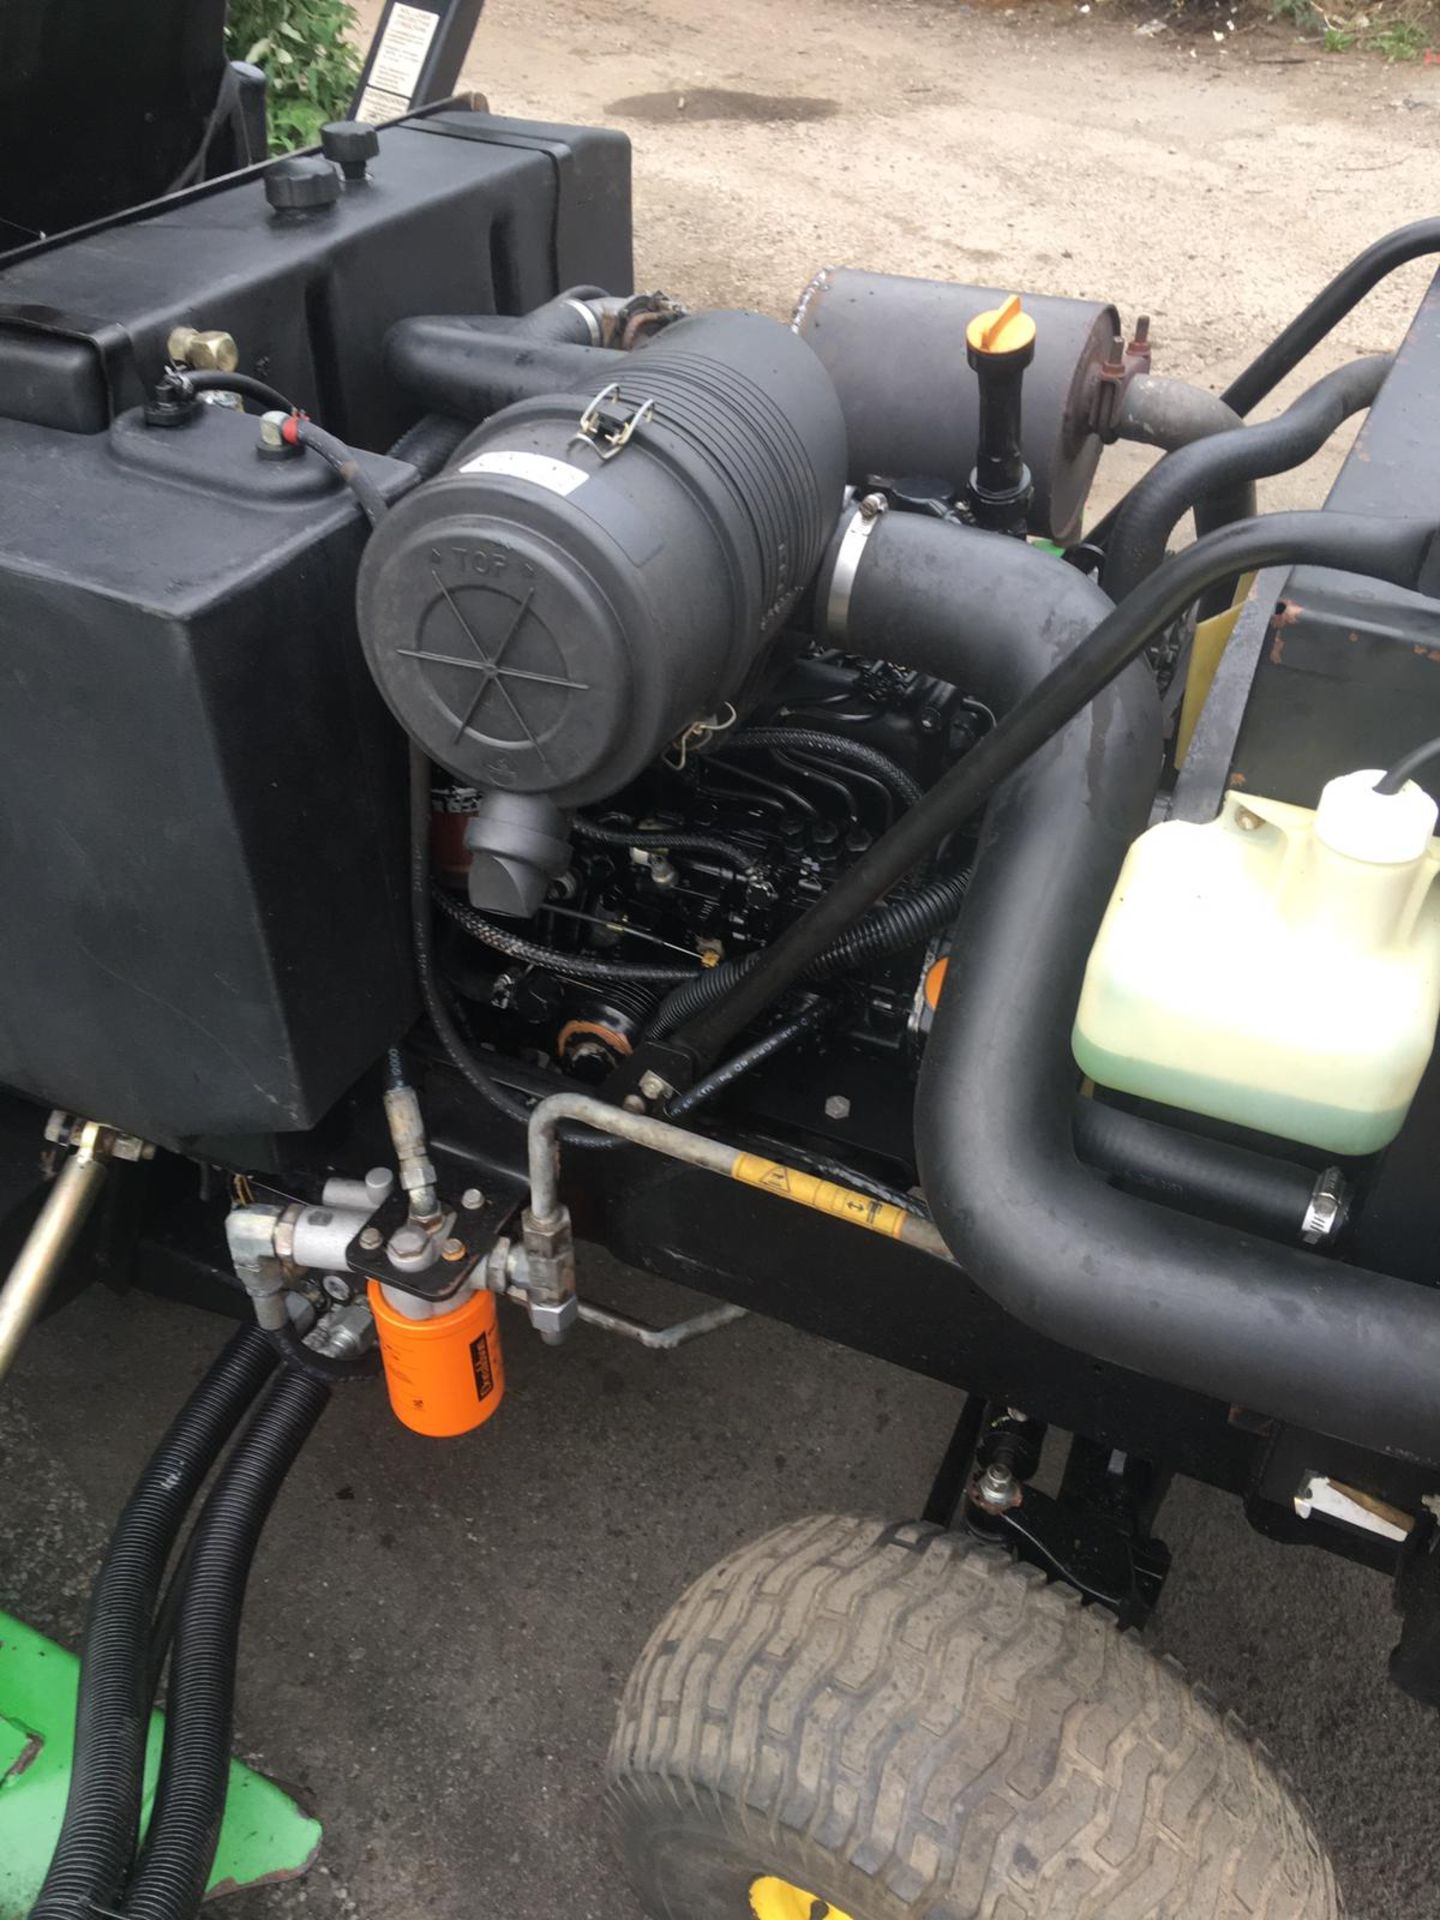 JOHN DEERE 1600 WIDE AREA TURBO BATWING RIDE ON LAWN MOWER, CRUISE CONTROL, RUNS & WORKS *NO VAT* - Image 20 of 24